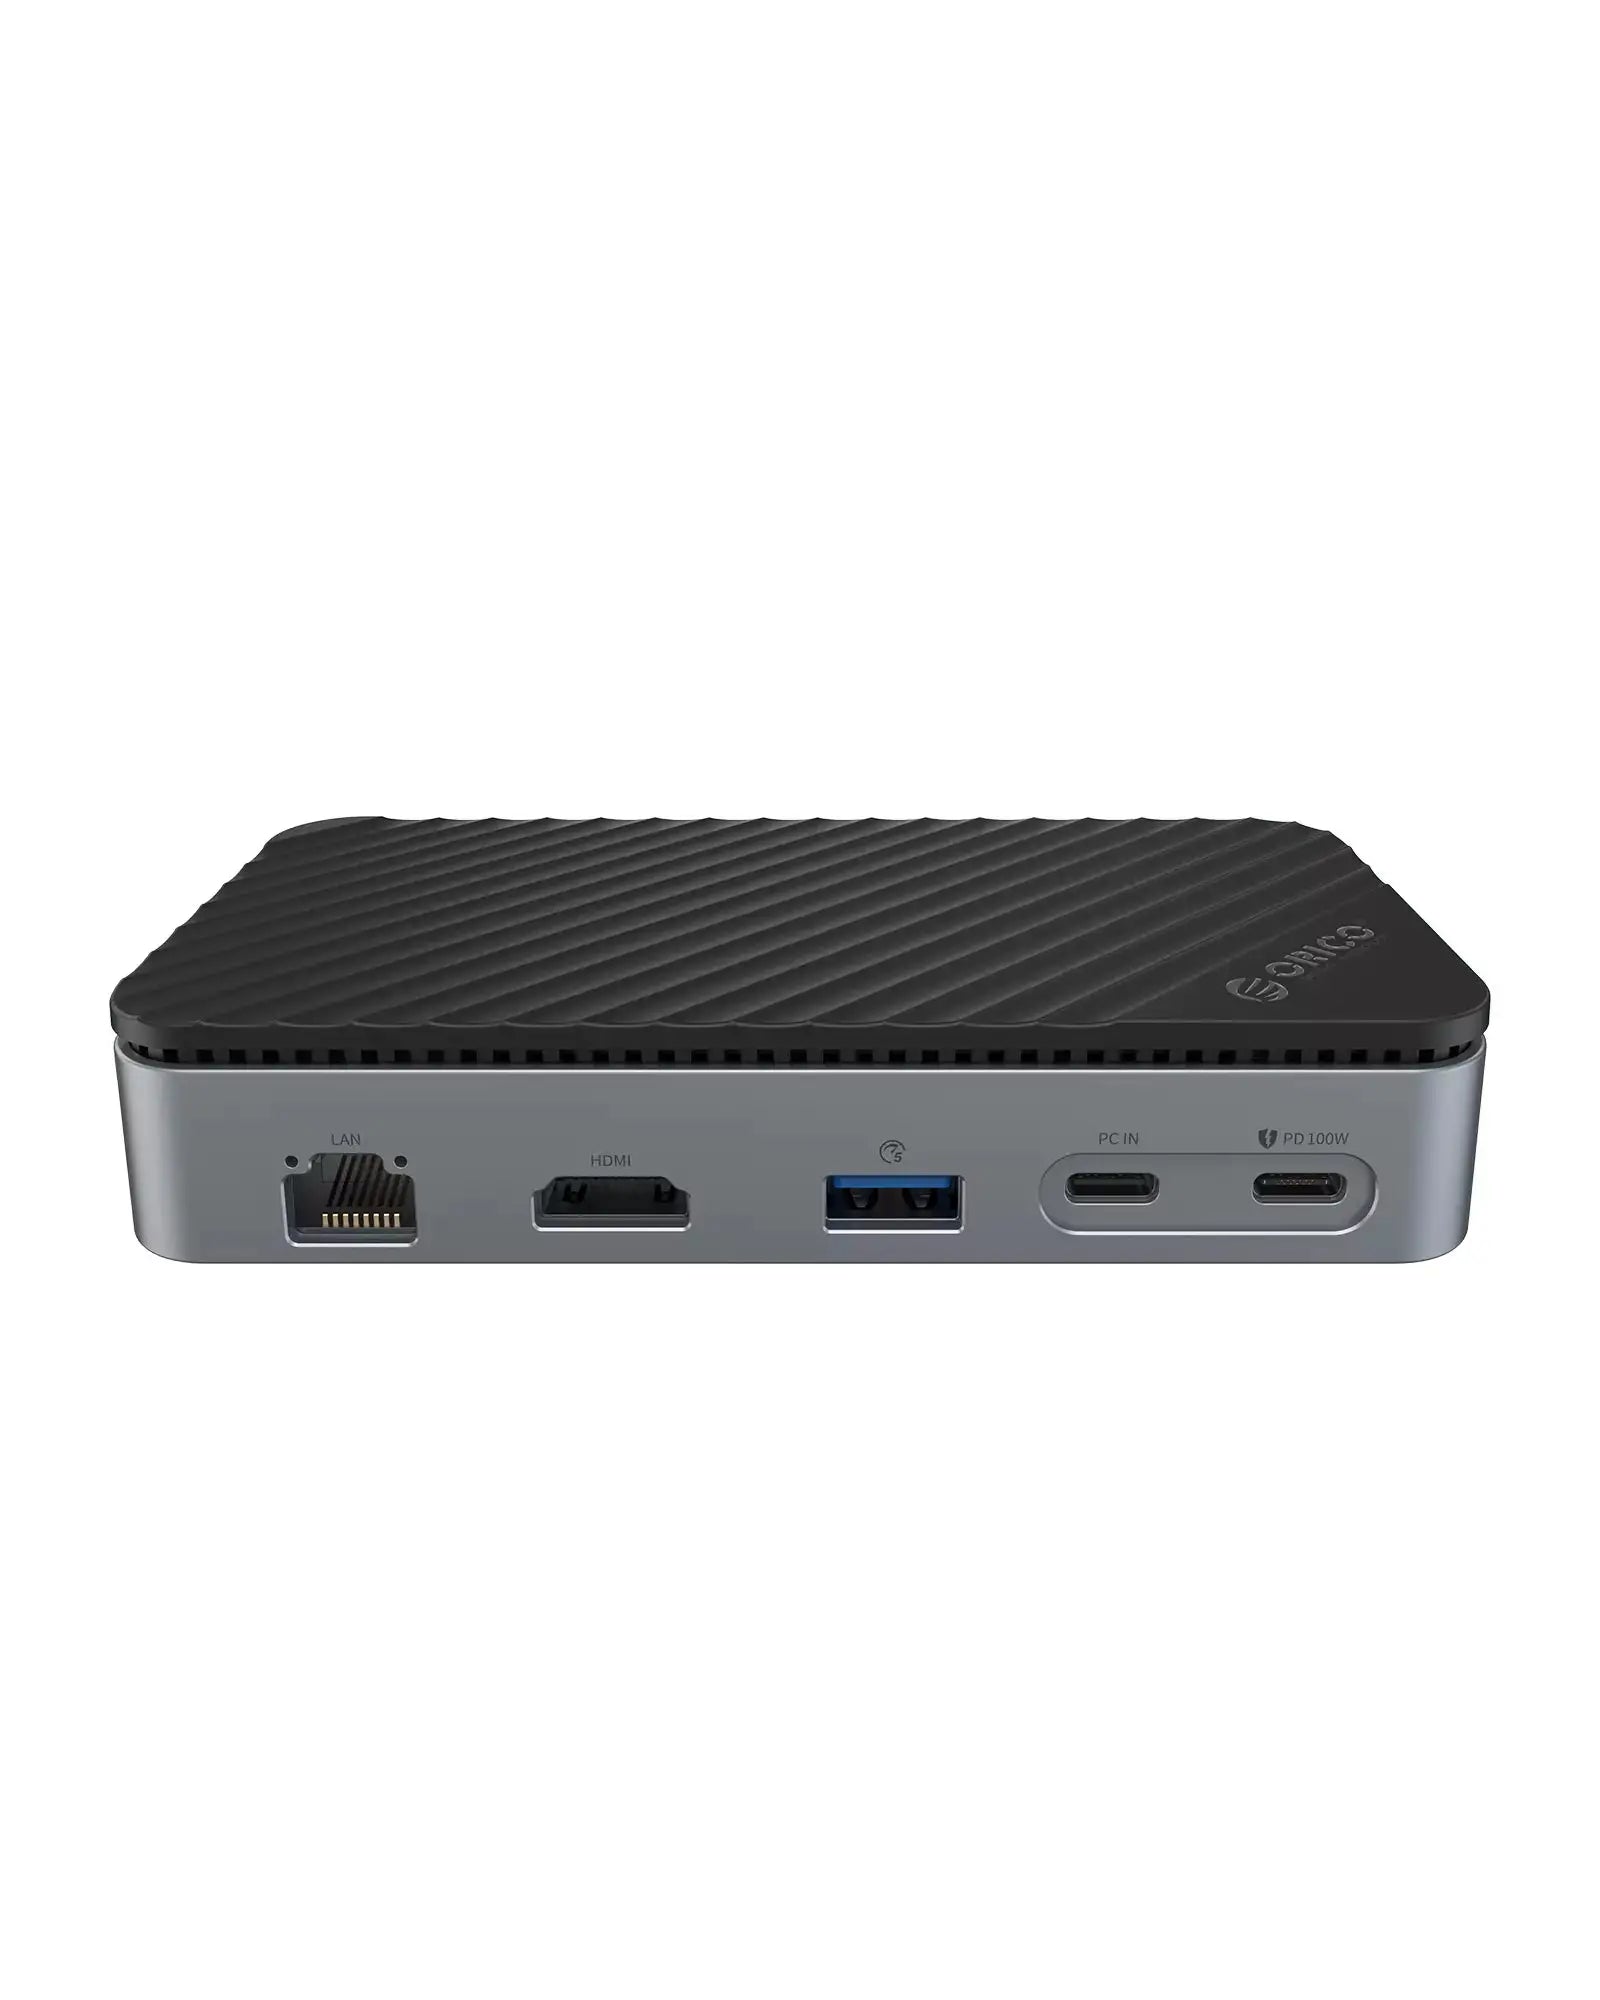 ORICOI 10-IN-1 Docking Station with M.2 SSD Enclosure ORICO